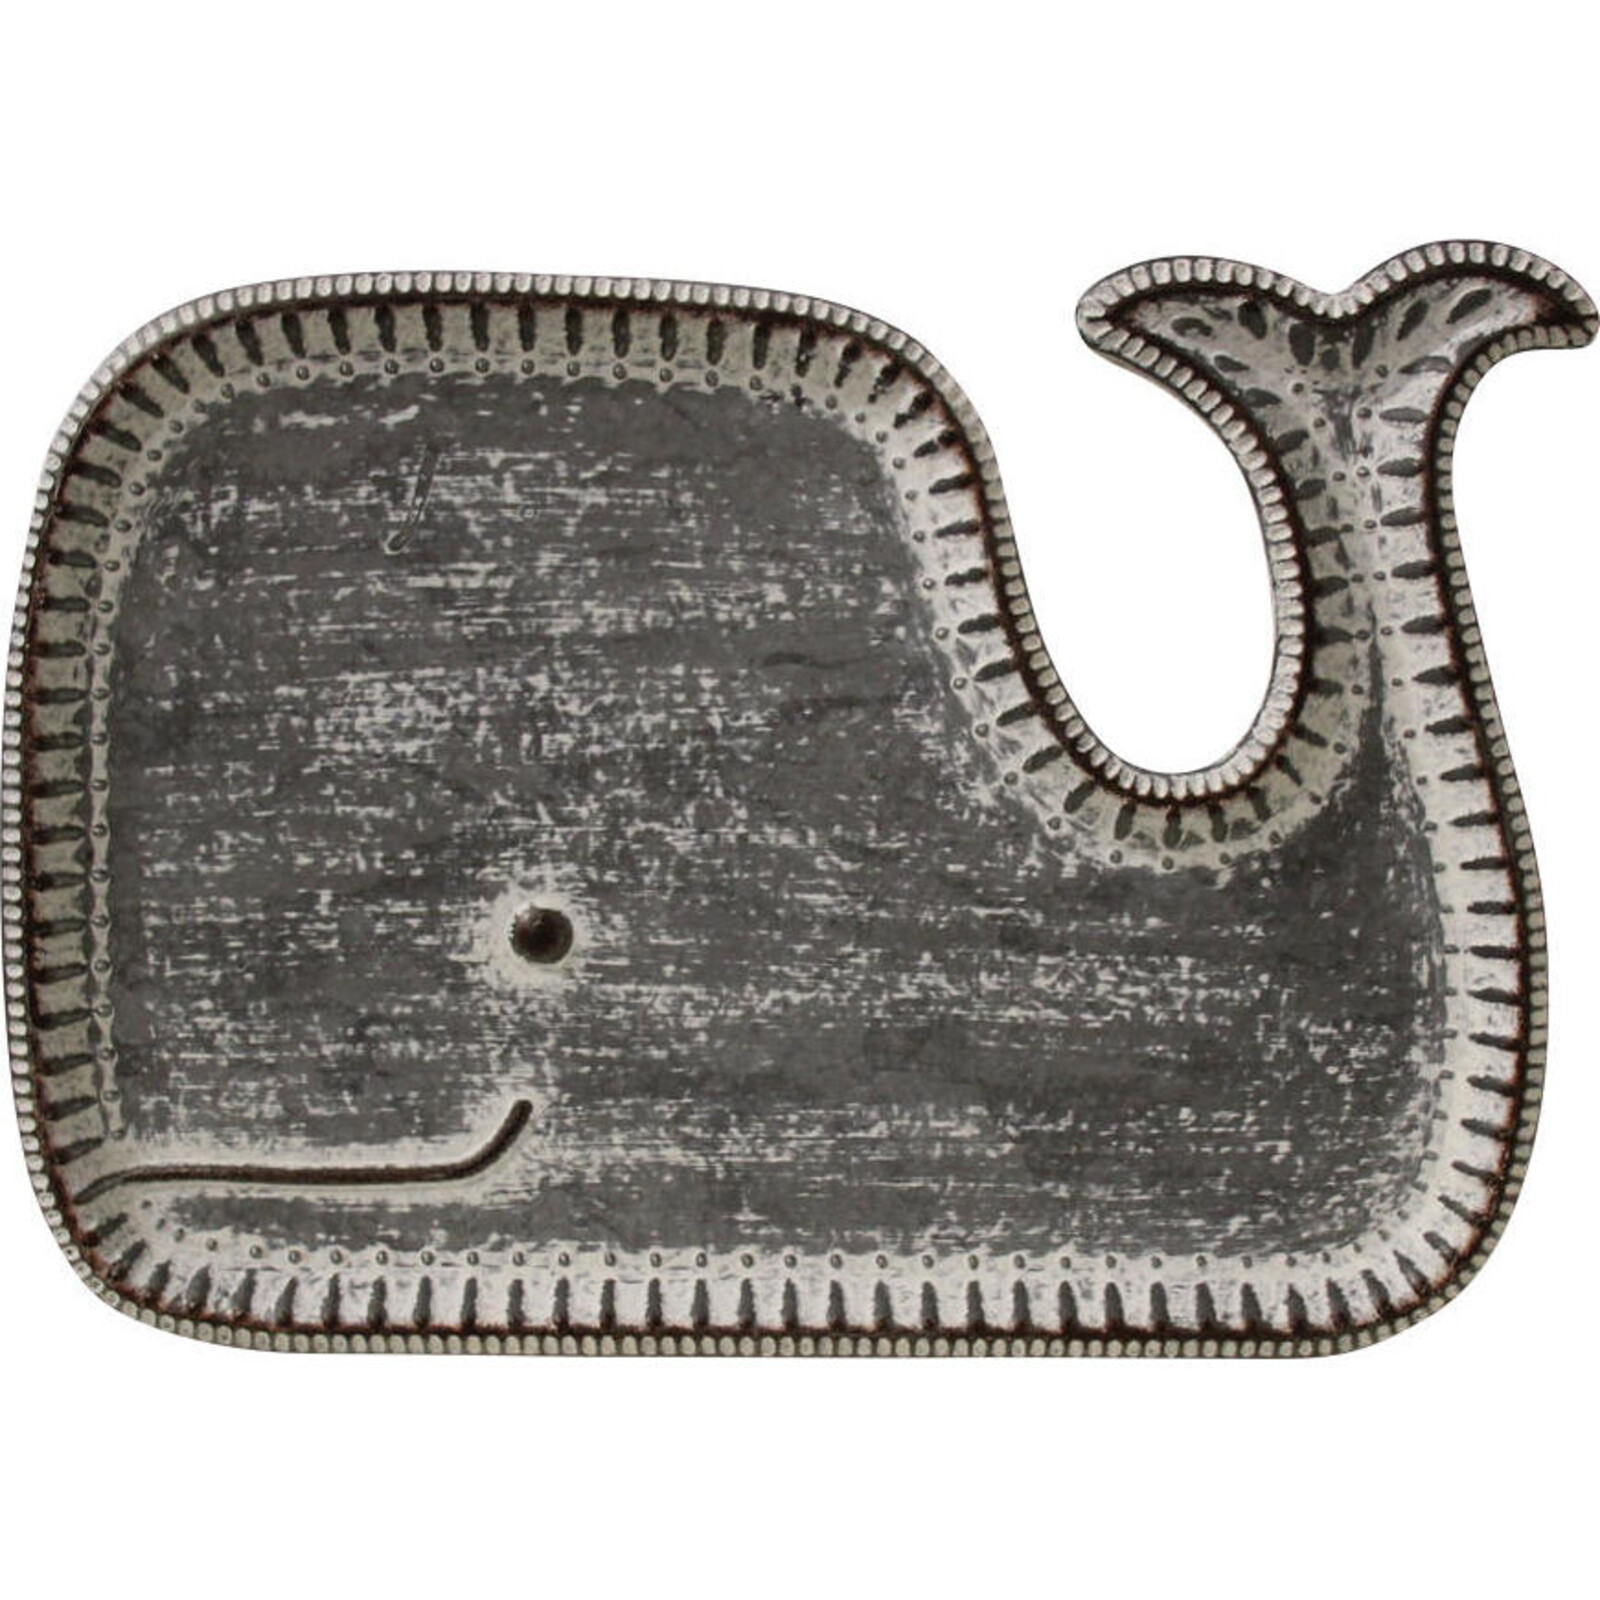 Whale Tray